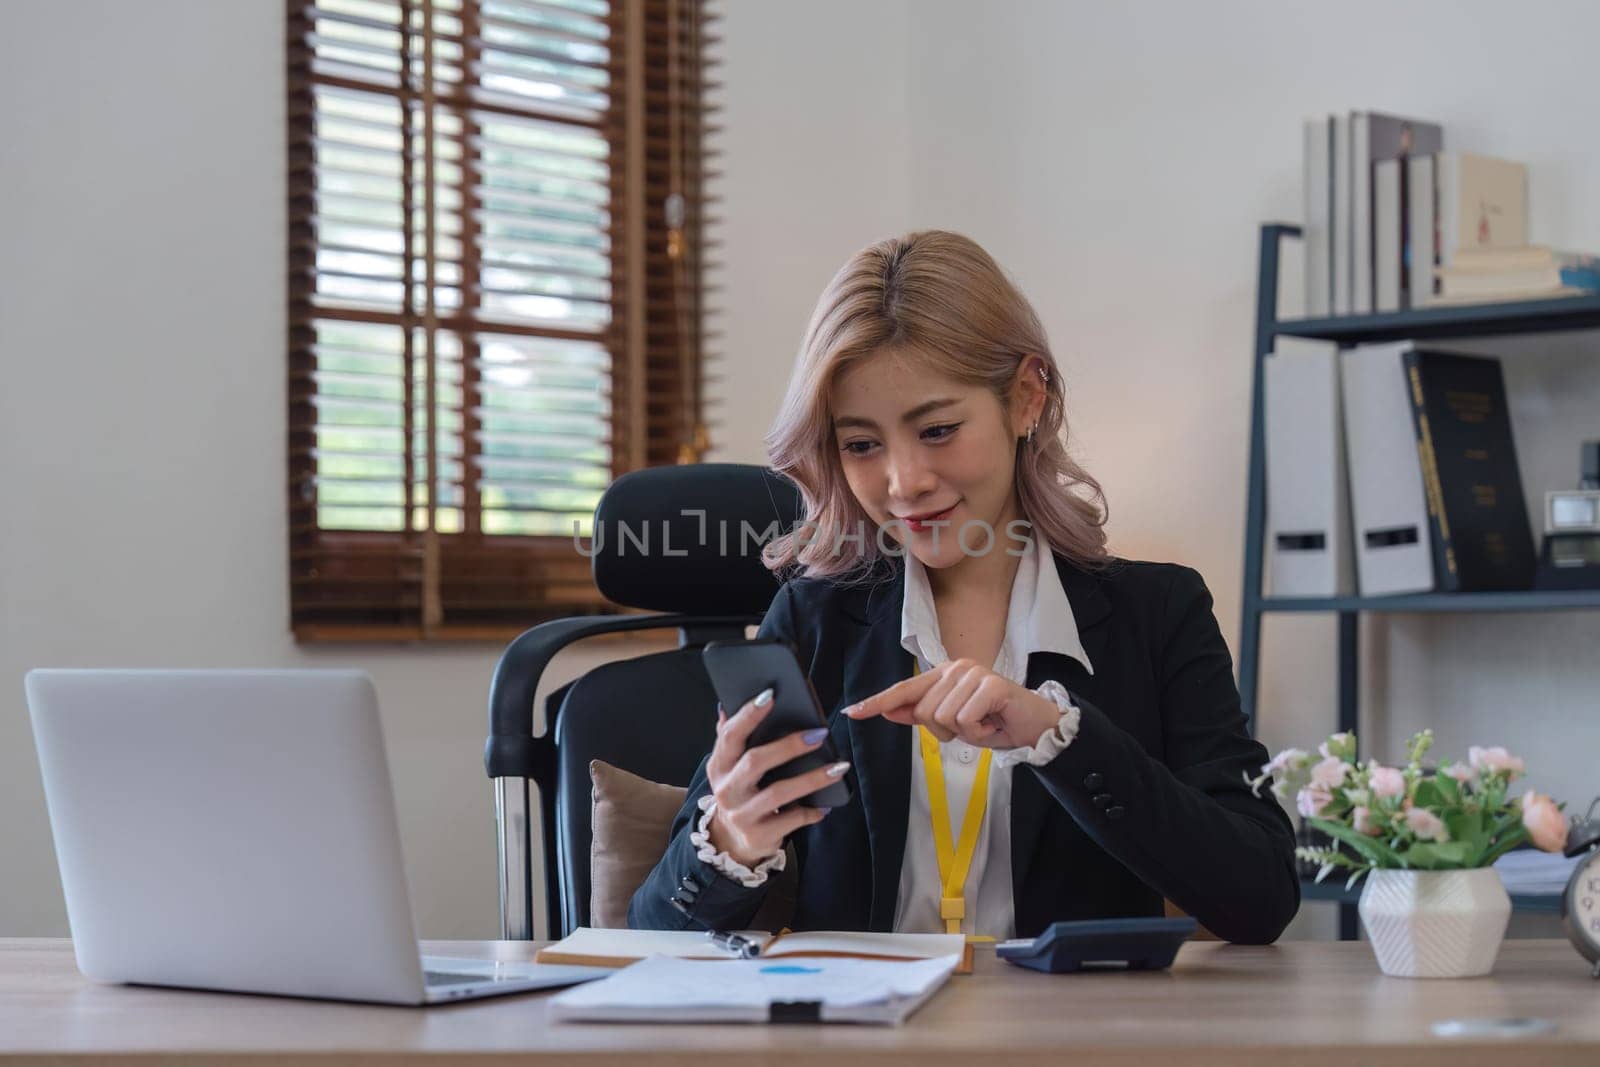 business woman with phone for communication typing while smile happy and relax.